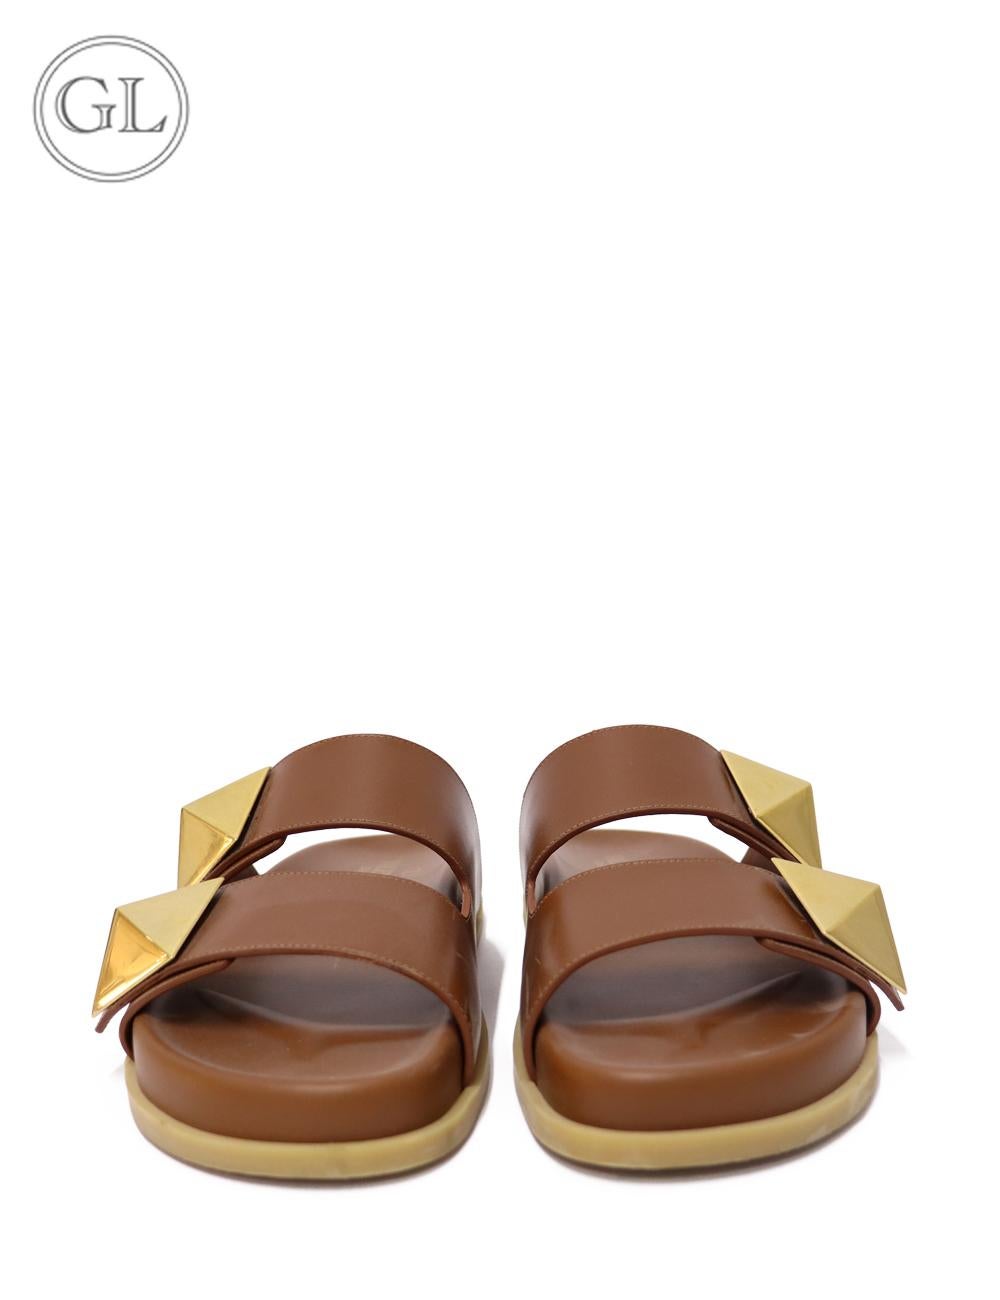 Valentino Studded Leather Slides in Tan Brown, detailed with dual studded straps and a platform sole..

Material: Leather.
Size: EU 38.5
Overall Condition: Excellent
Interior Condition: Signs of use
Exterior Condition: Like New